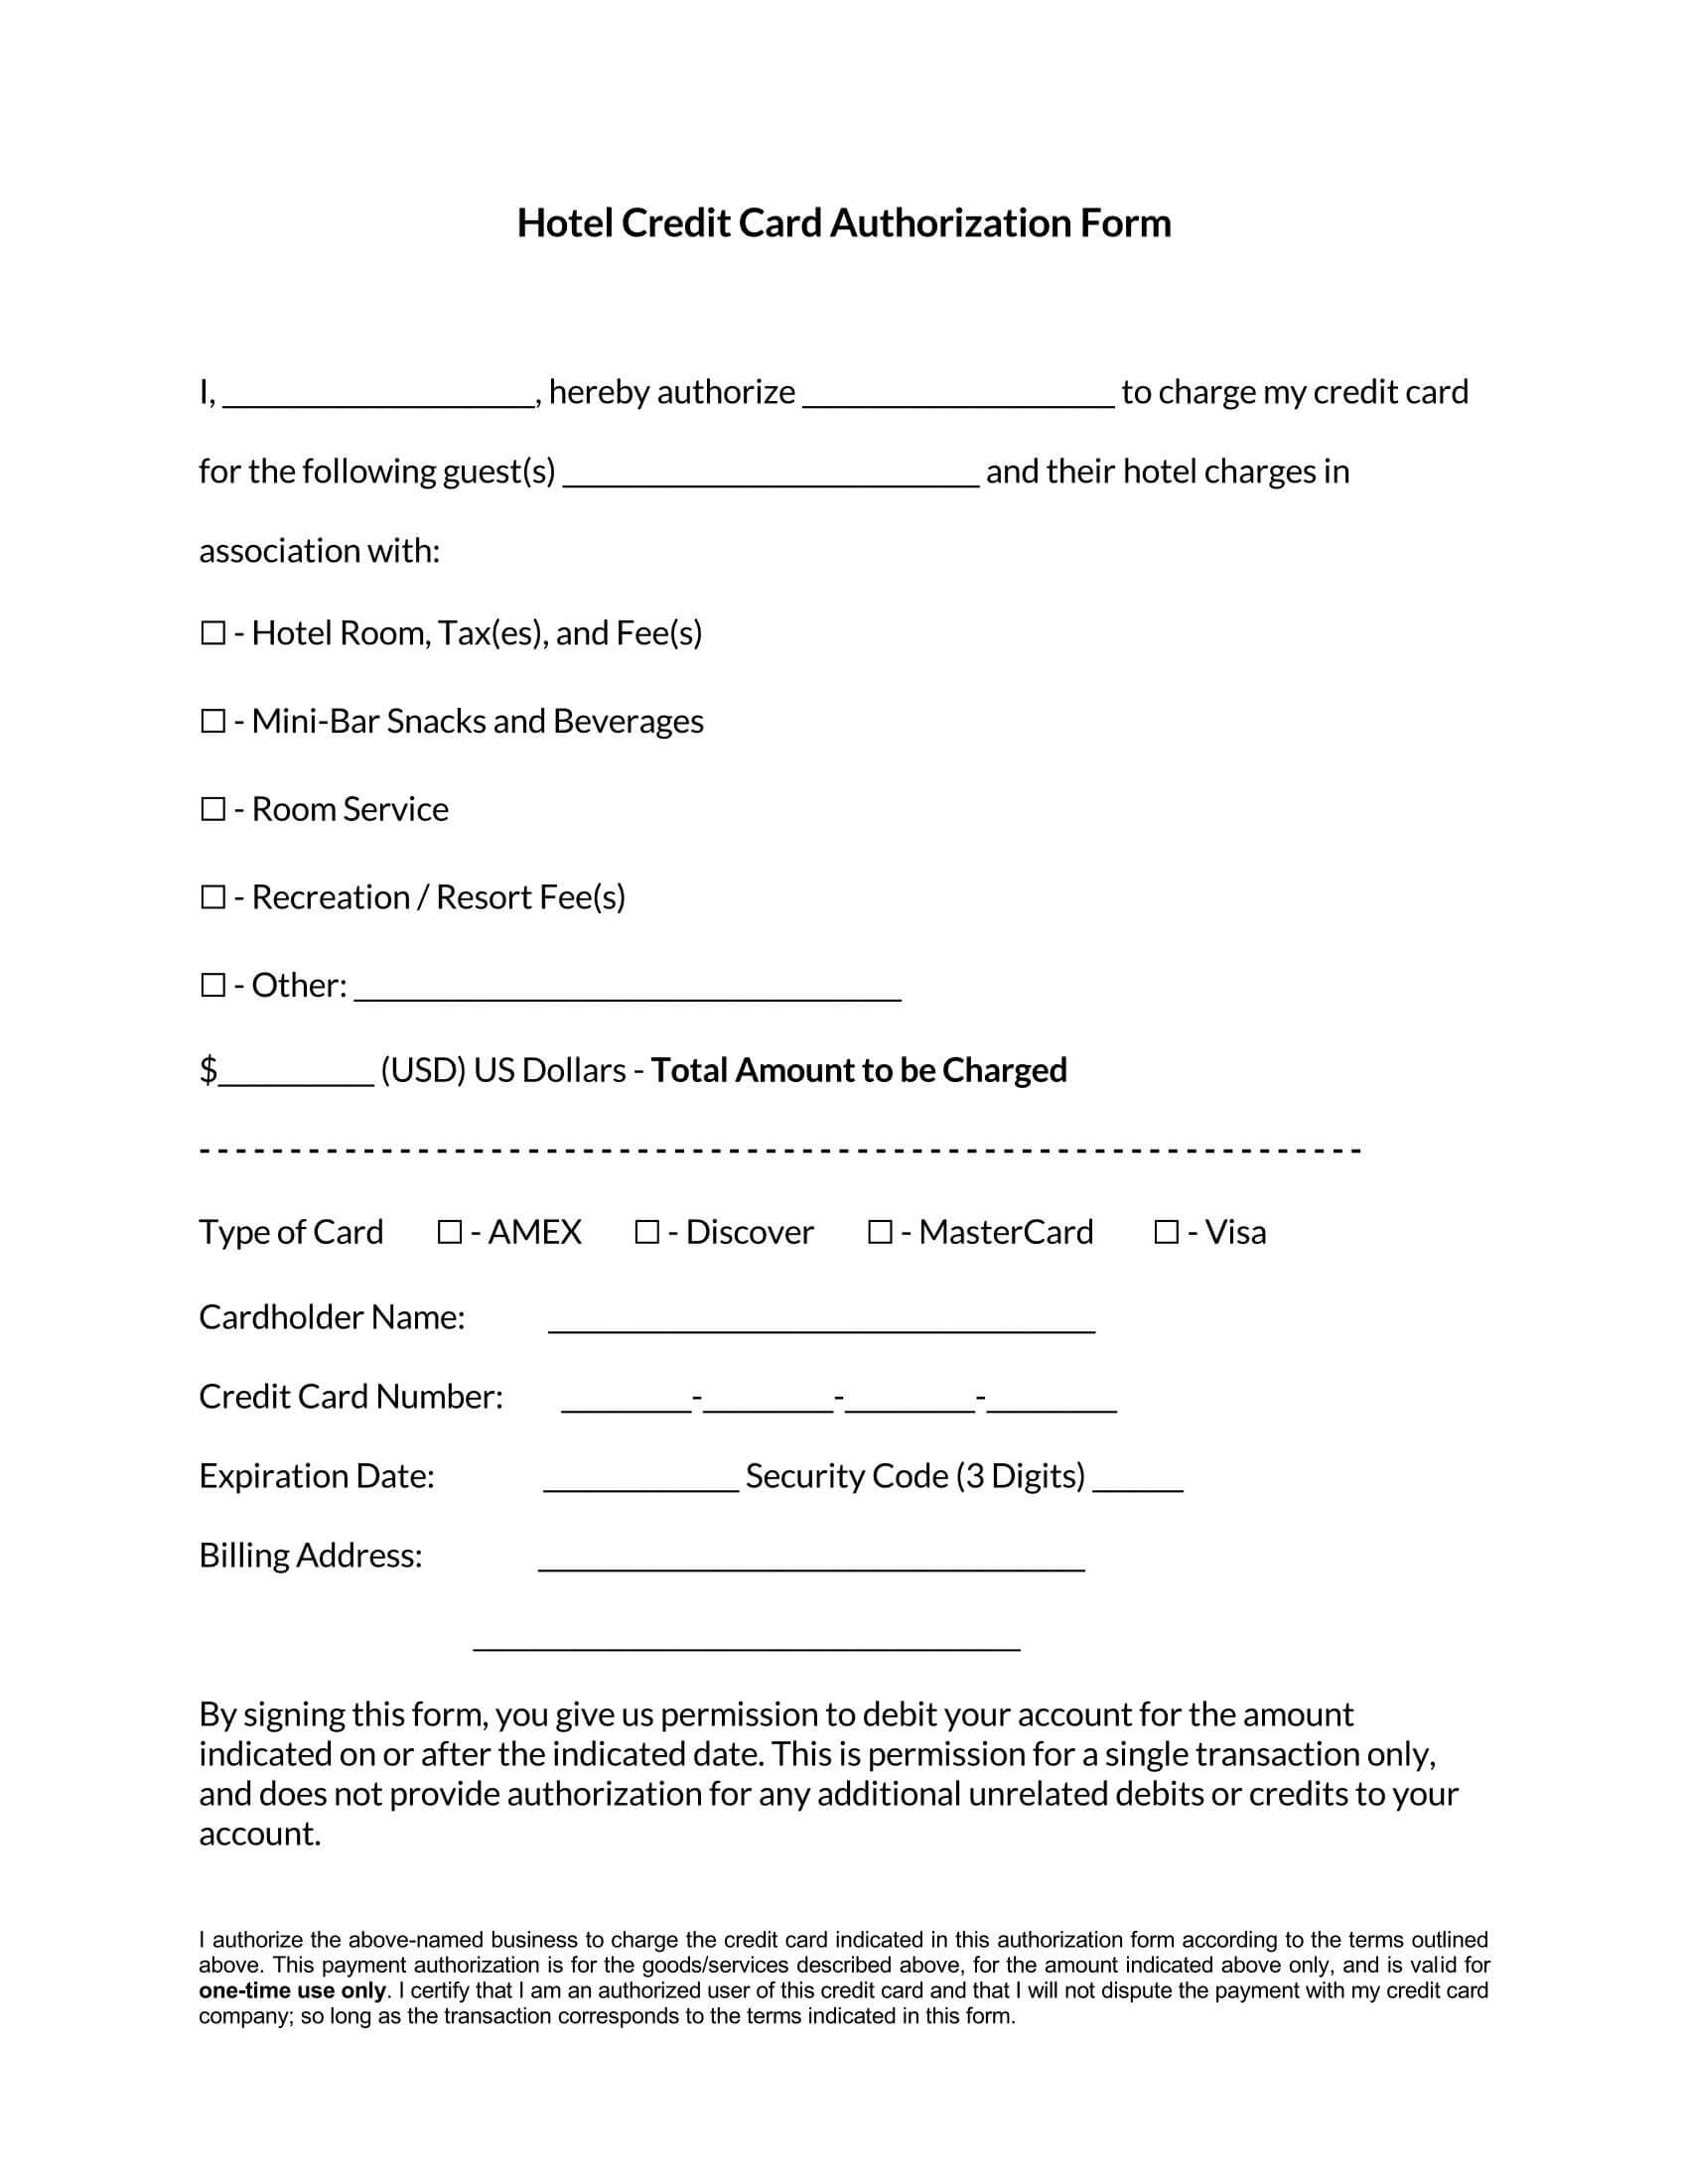 printable-downloadable-credit-card-authorization-form